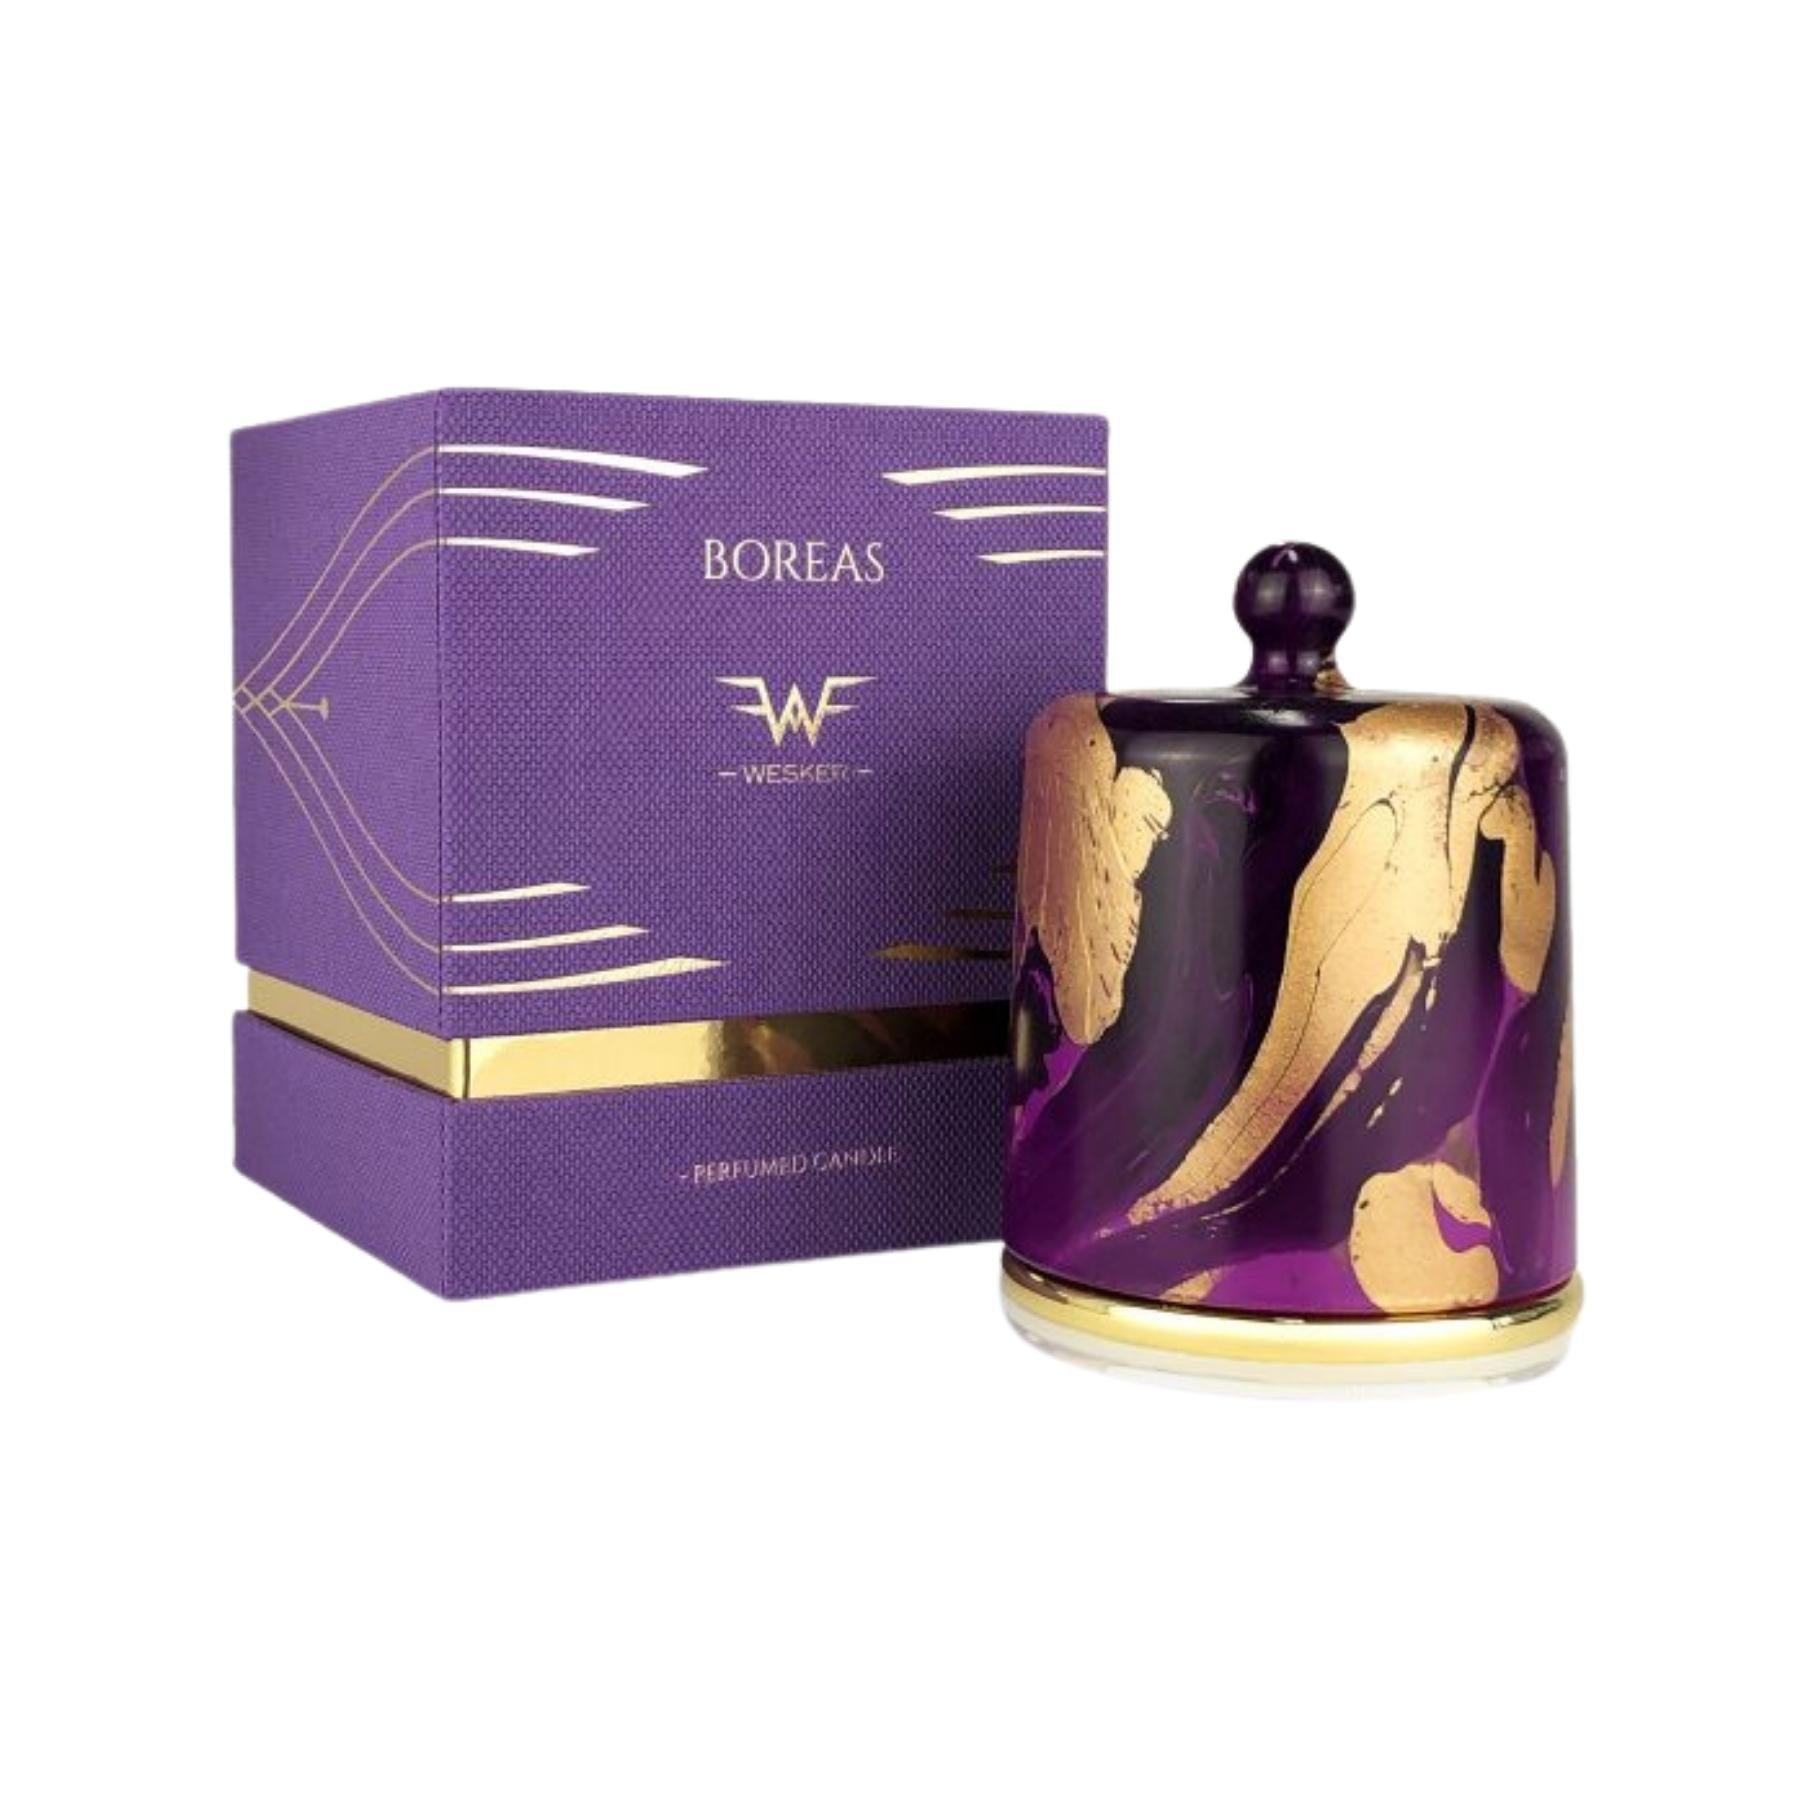 BOREAS - PERFUMED CANDLE - WESKER - 200gr